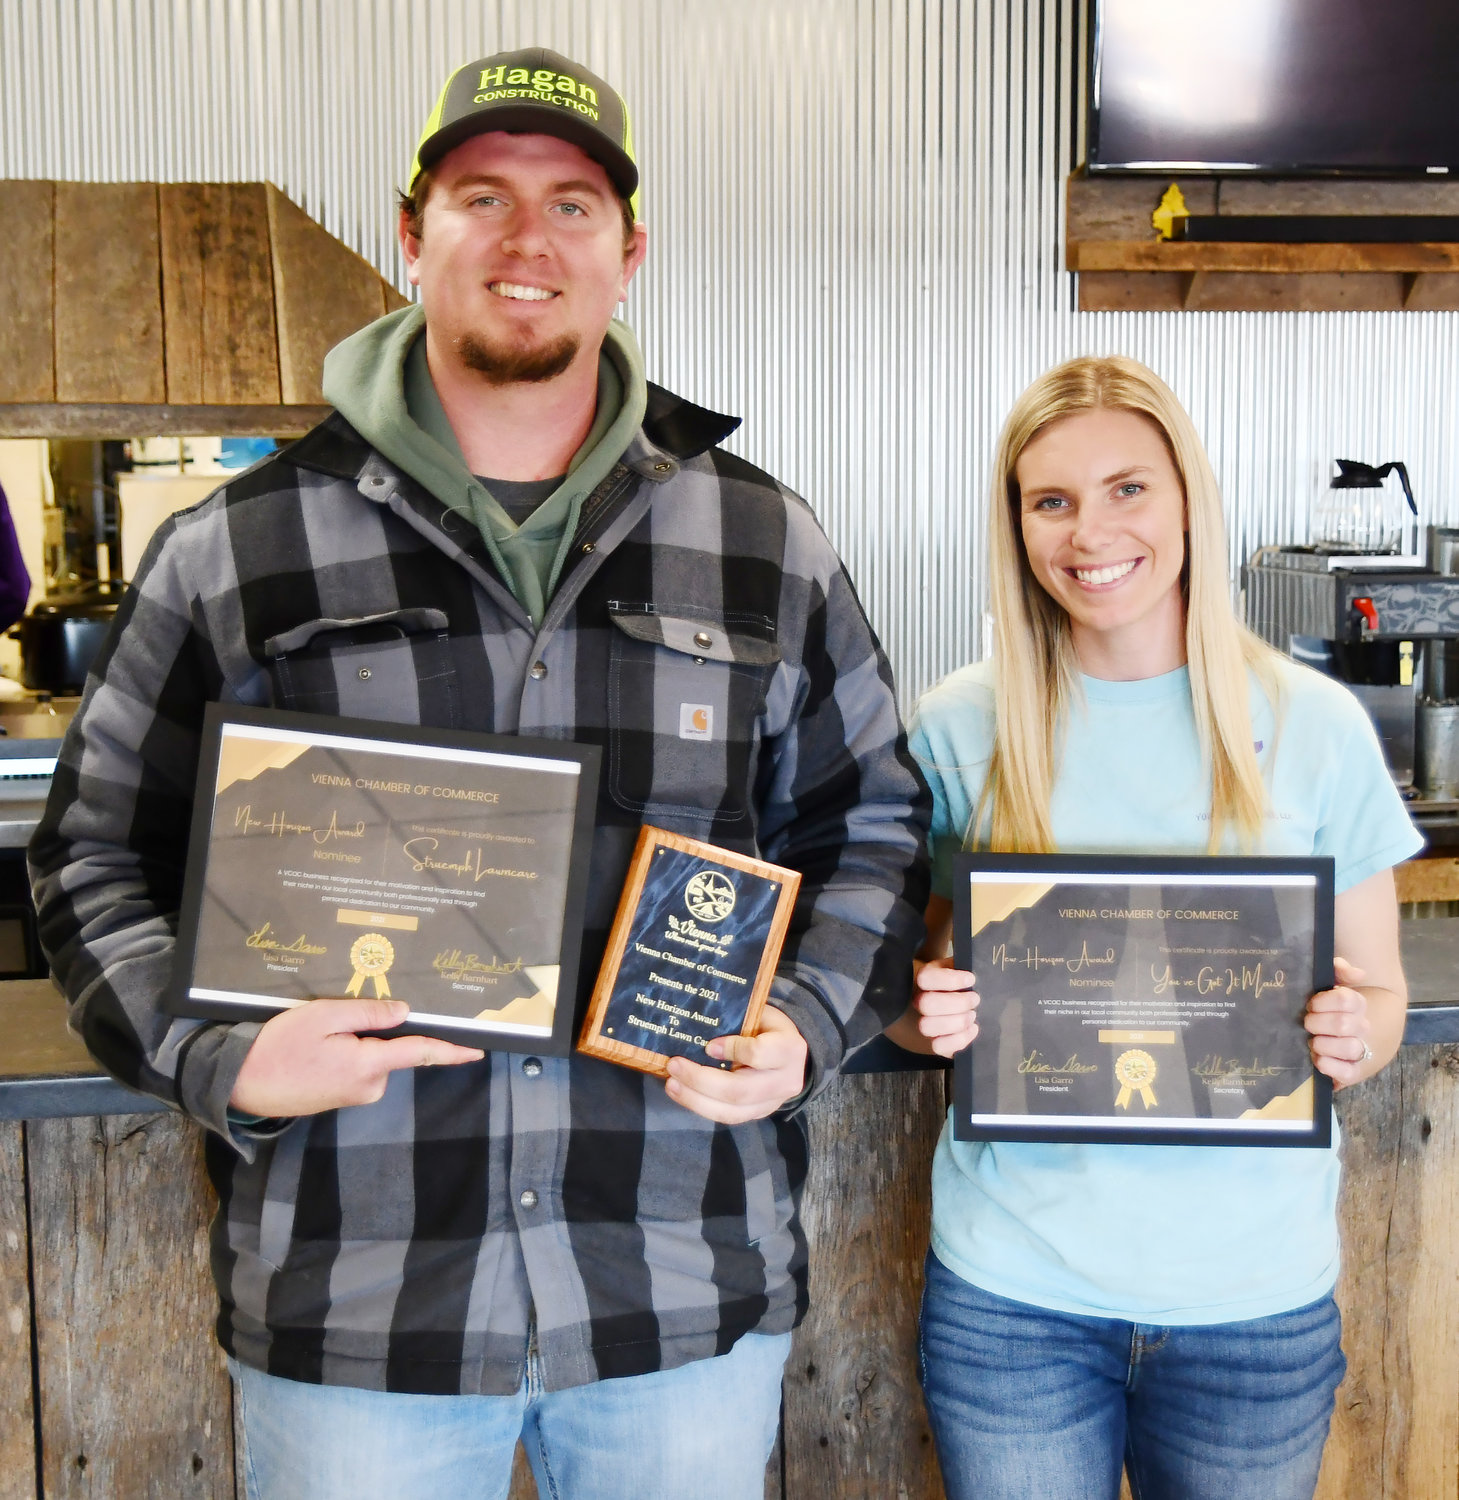 Dominic Struemph, owner of Struemph Lawn Care,  was the winner of the New Horizon Award. Pictured with him is one of the other nominees, Kalee Shumaker, owner of You’ve Got It Maid. Not pictured is Denine Bremer, owner of 63 Vintage Market and Antiques, which also was nominated for the award.